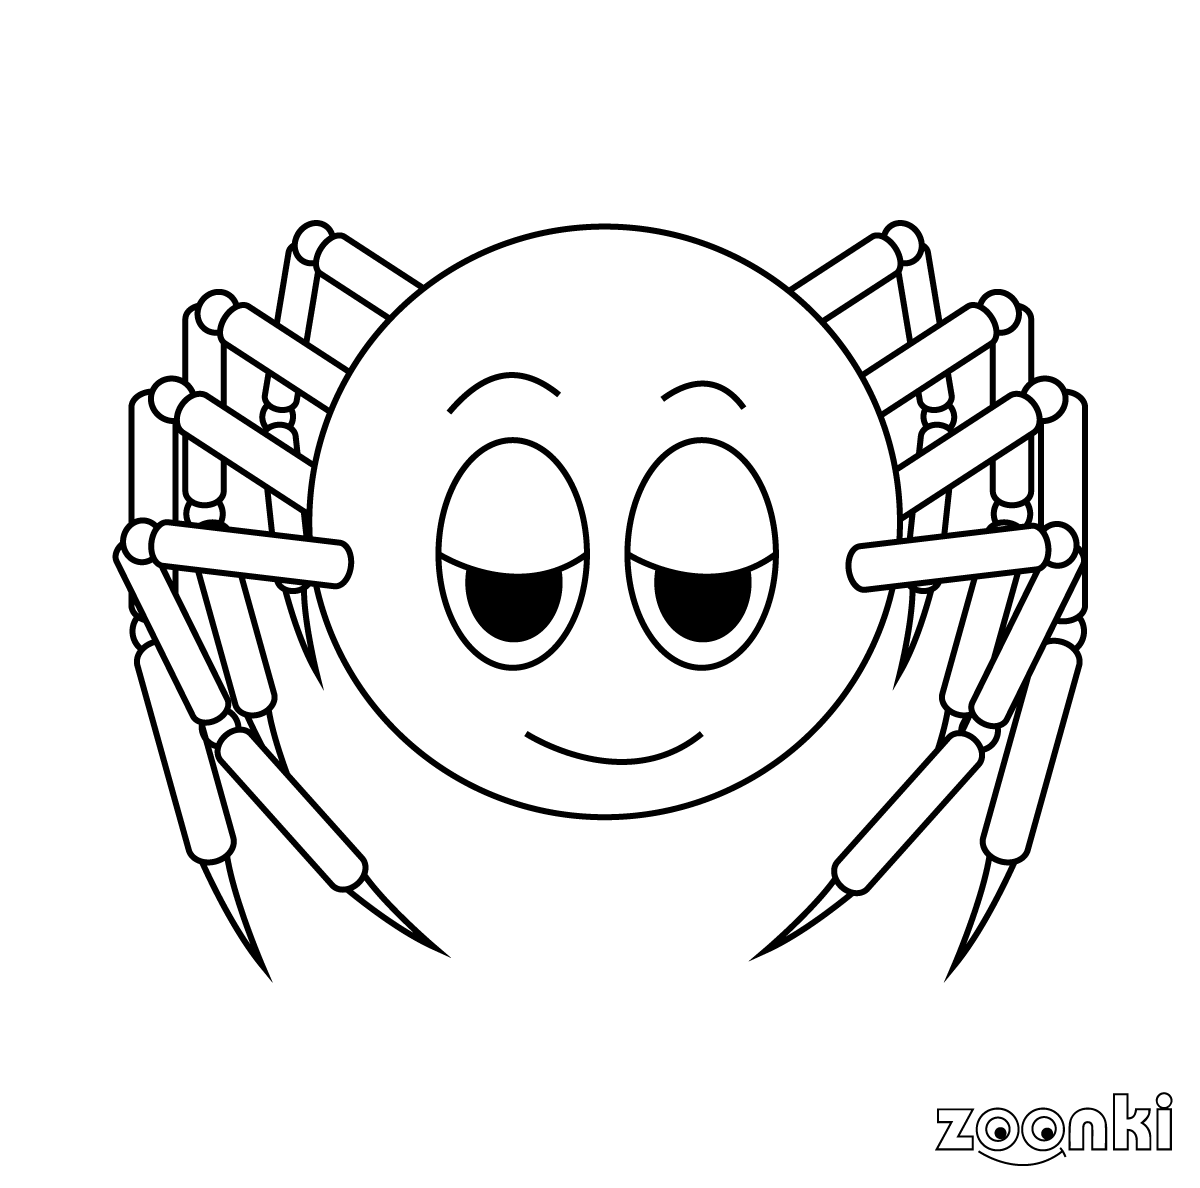 Free colouring pages -spider 002 - zoonki.com